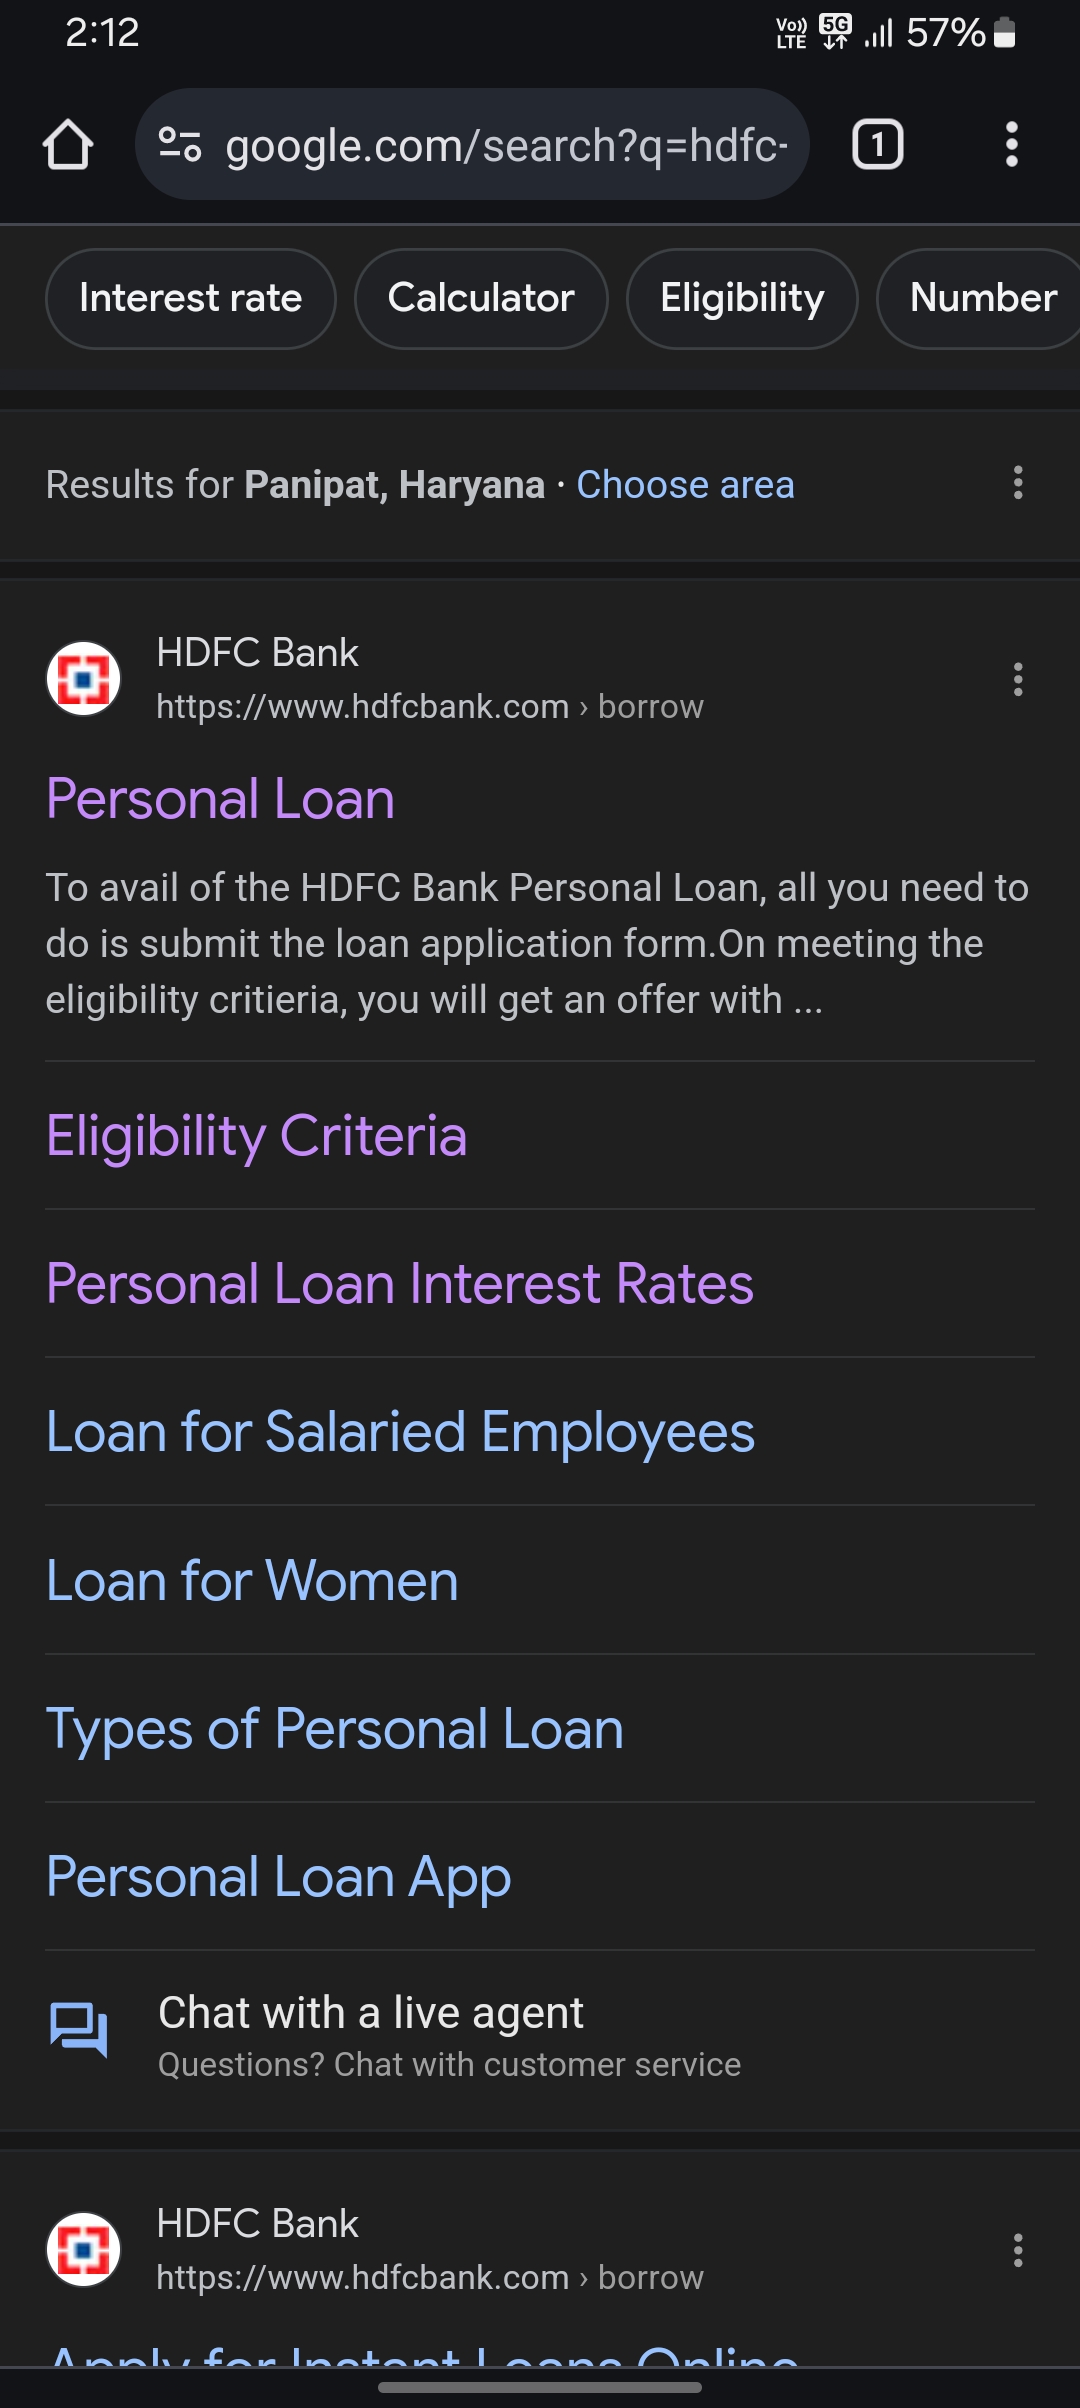 HDFC Bank personal loan online apply process step by step